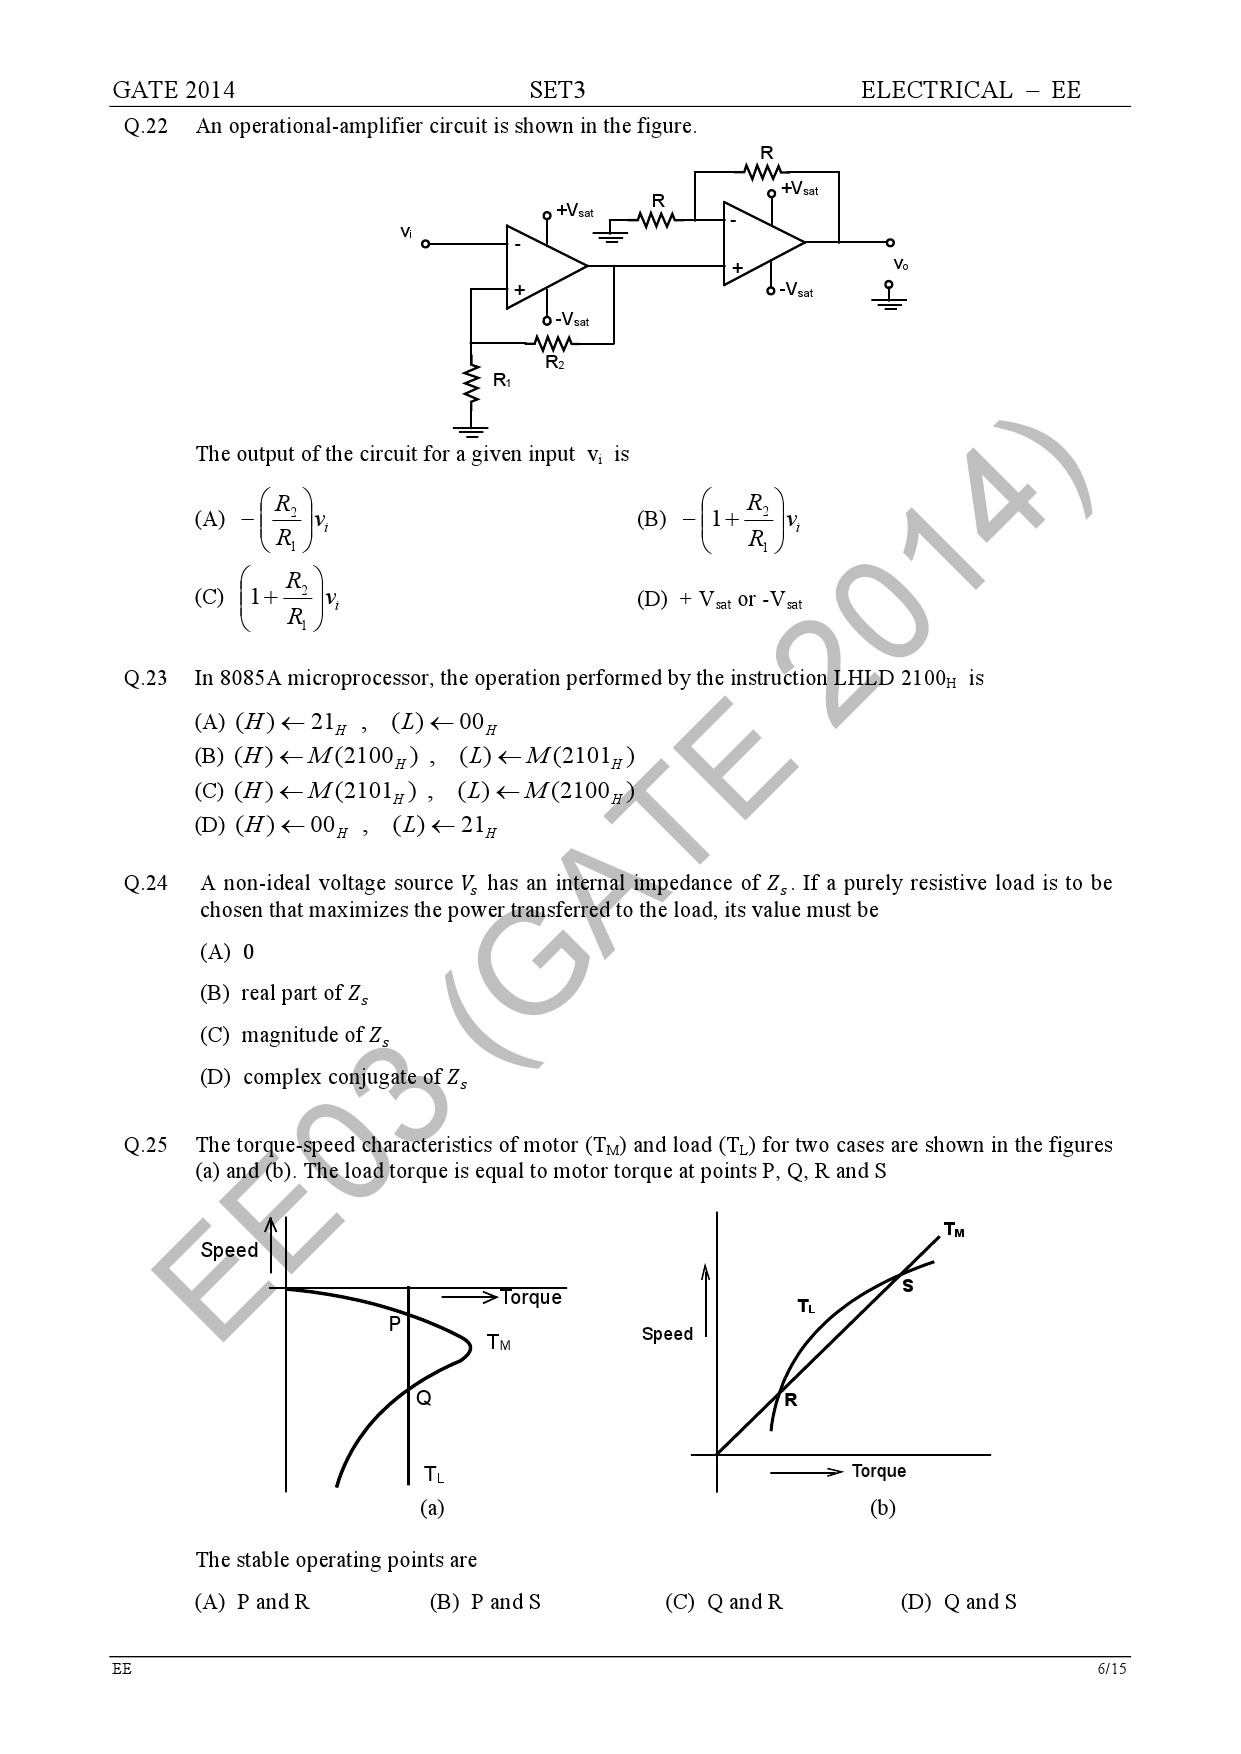 GATE Exam Question Paper 2014 Electrical Engineering Set 3 12